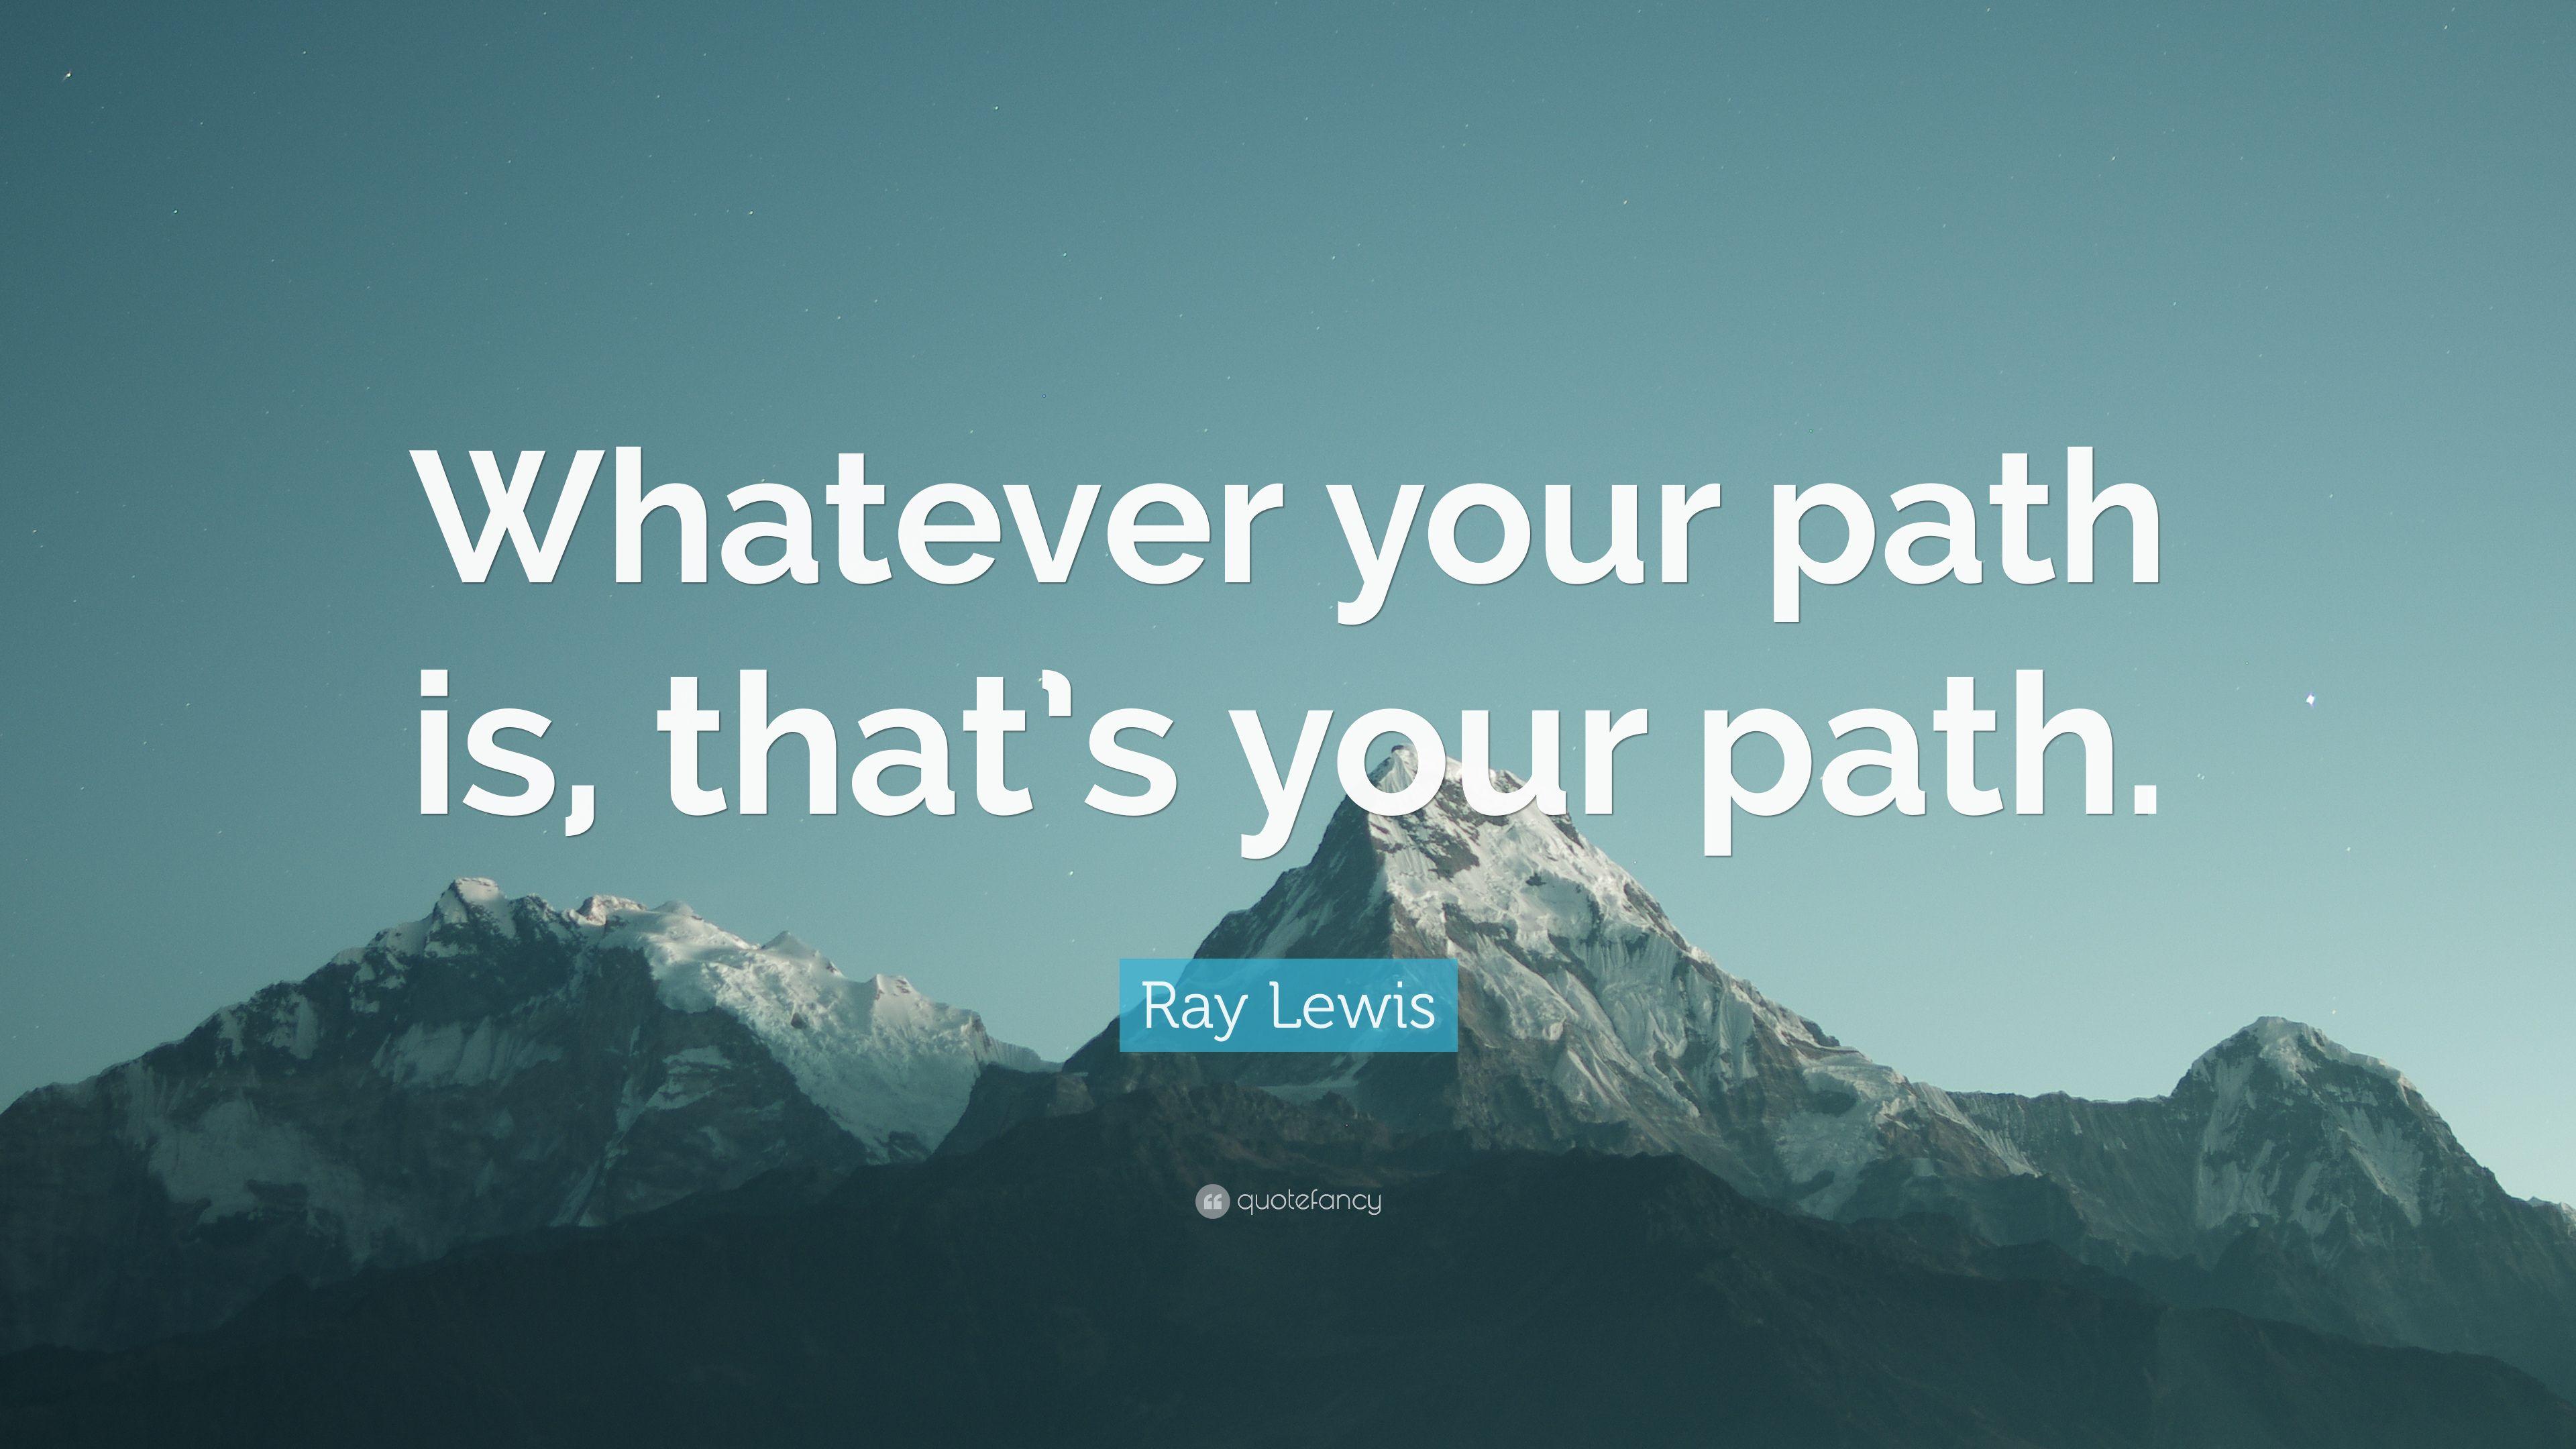 Ray Lewis Quote: “Whatever your path is, that's your path.” 10